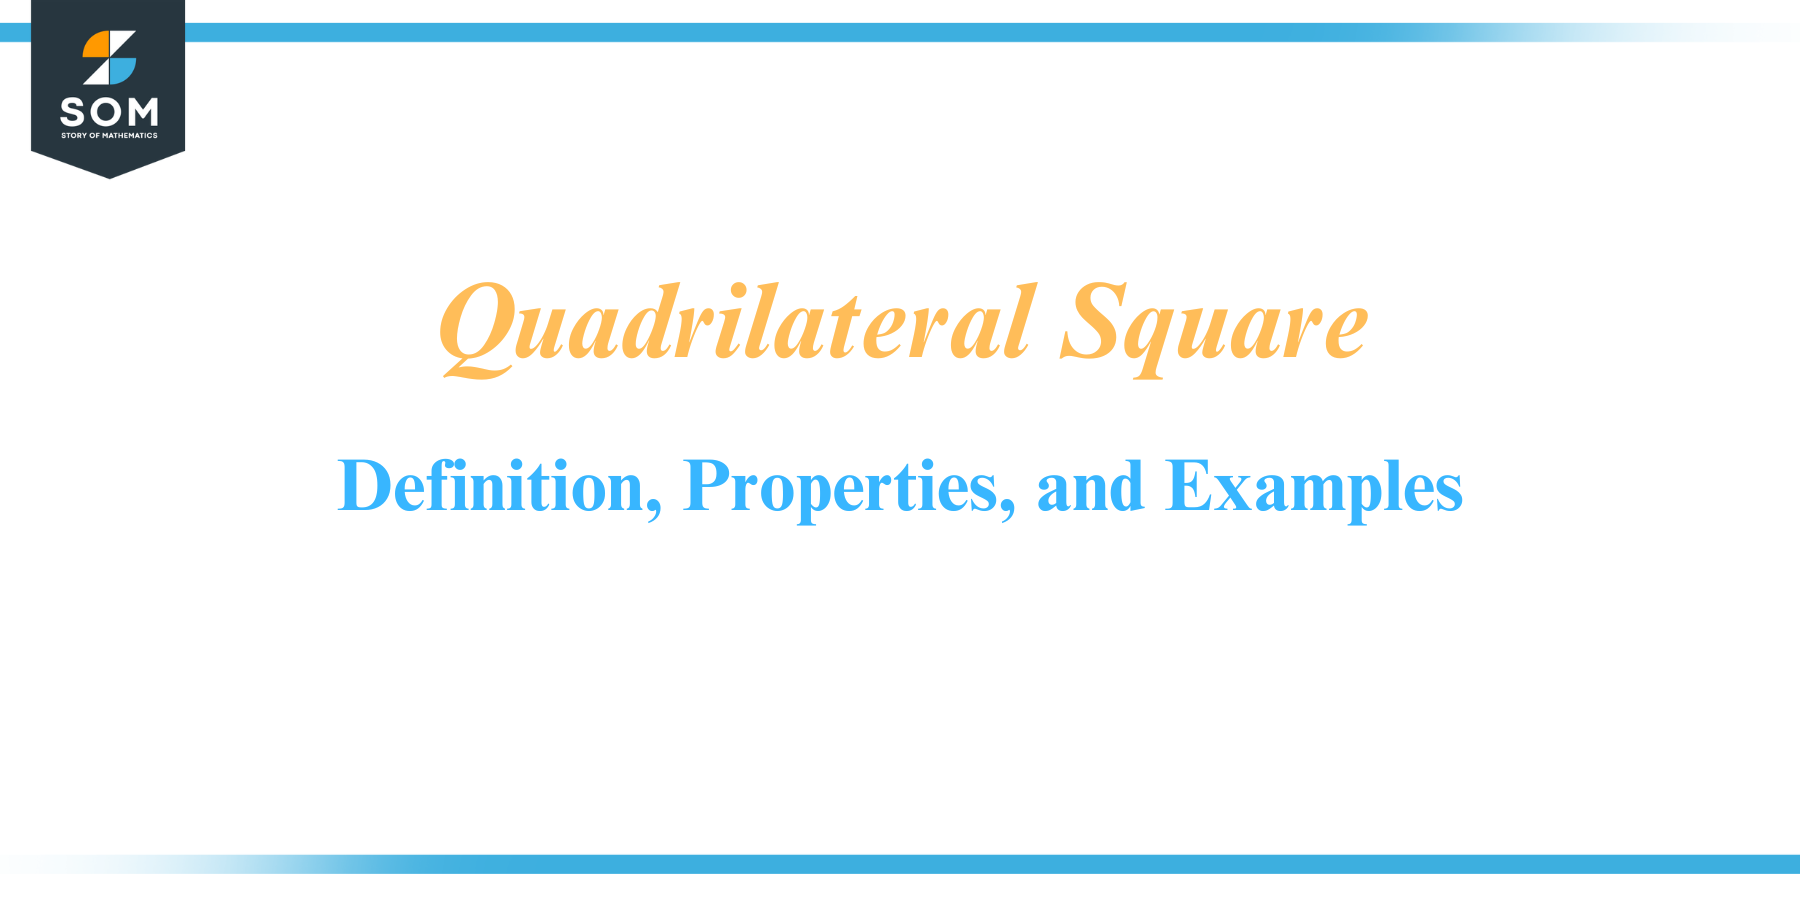 Quadrilaterals Square Definition Proprties and